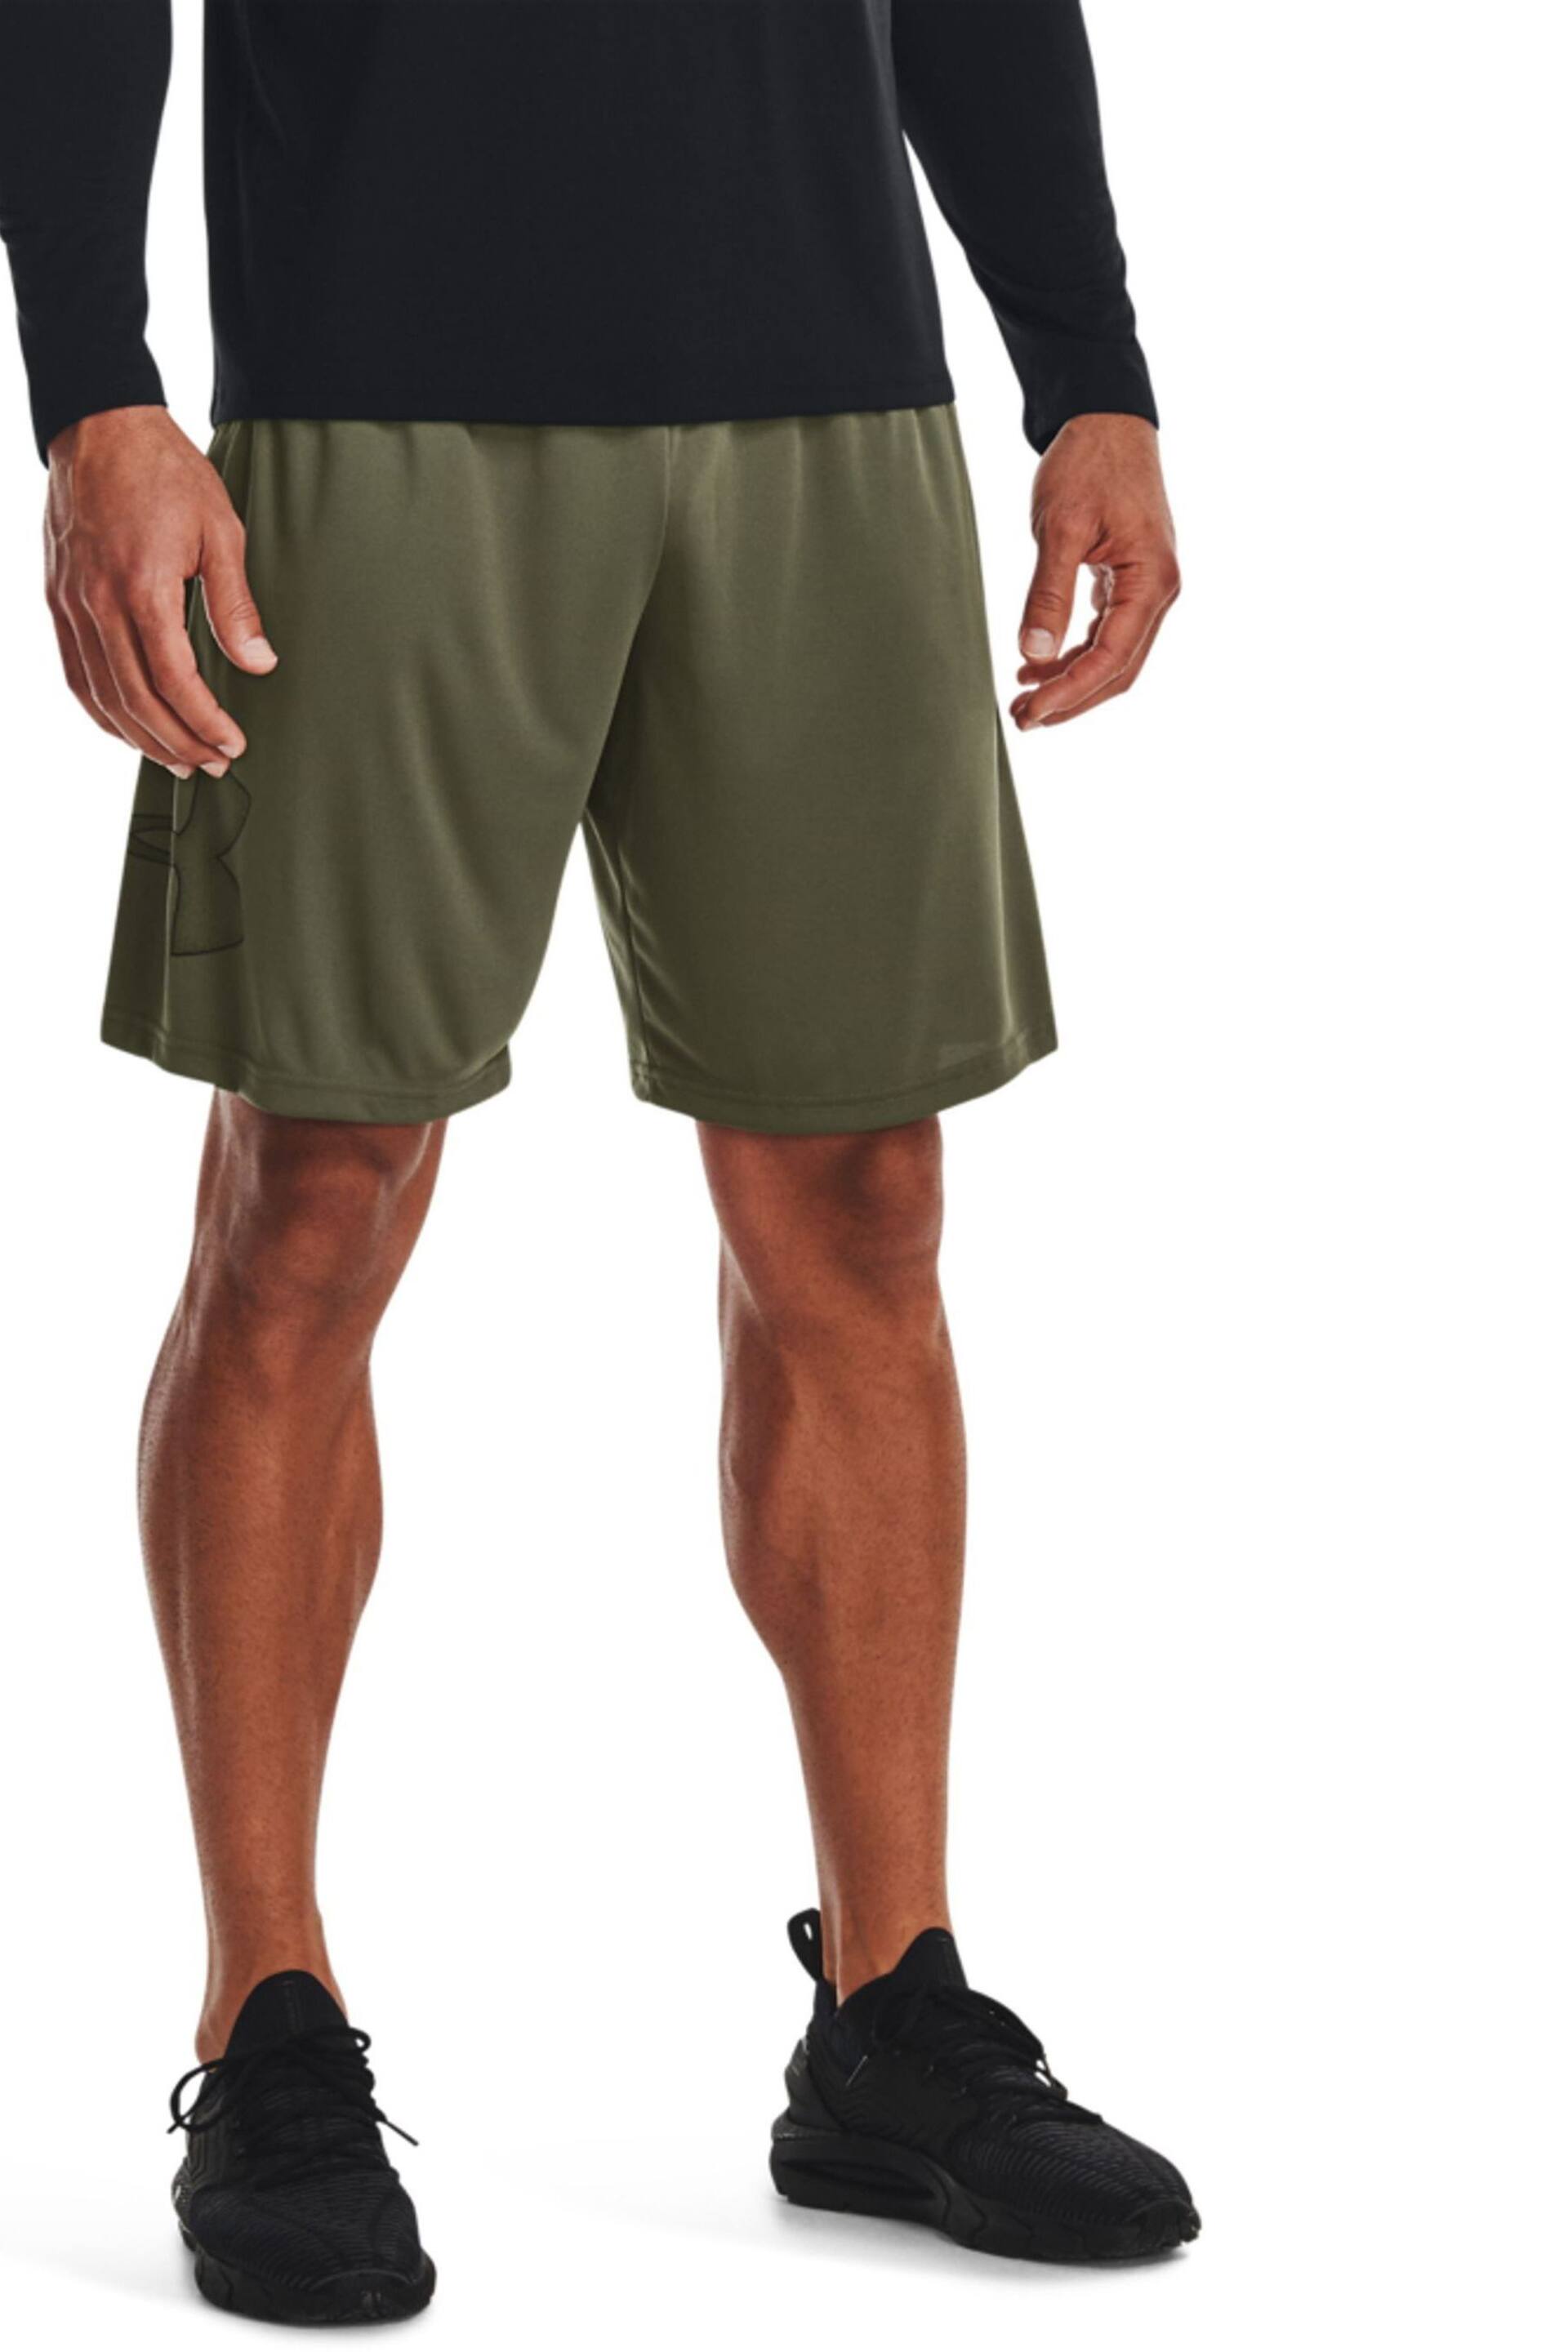 Under Armour Green Tech Graphic Shorts - Image 1 of 7